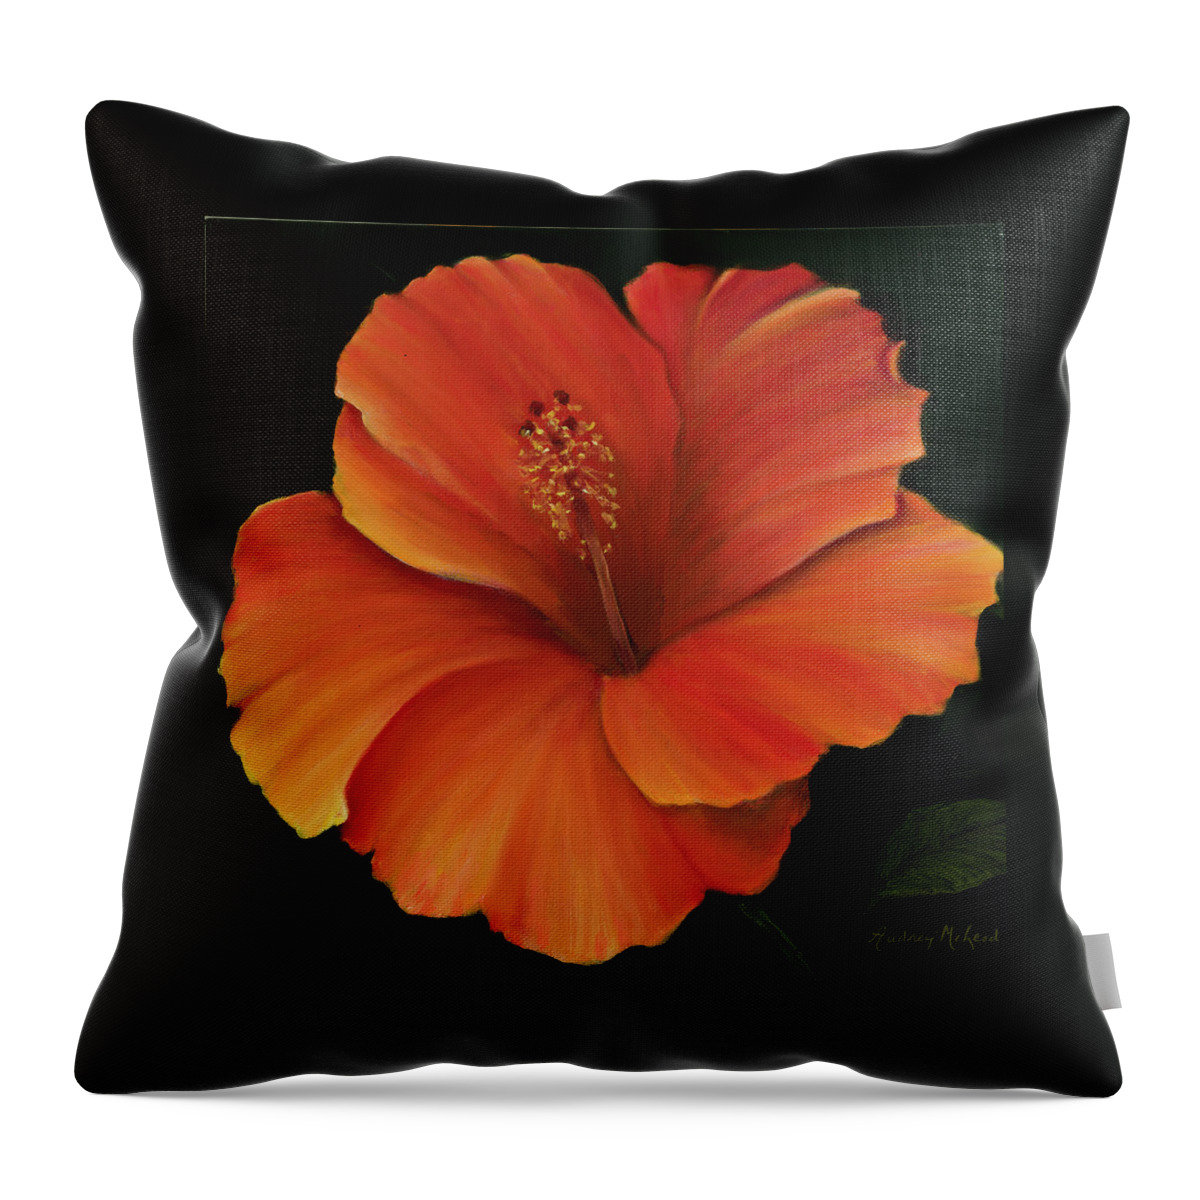 Red Hibiscus Throw Pillow featuring the painting Hibiscus Beauty by Audrey McLeod